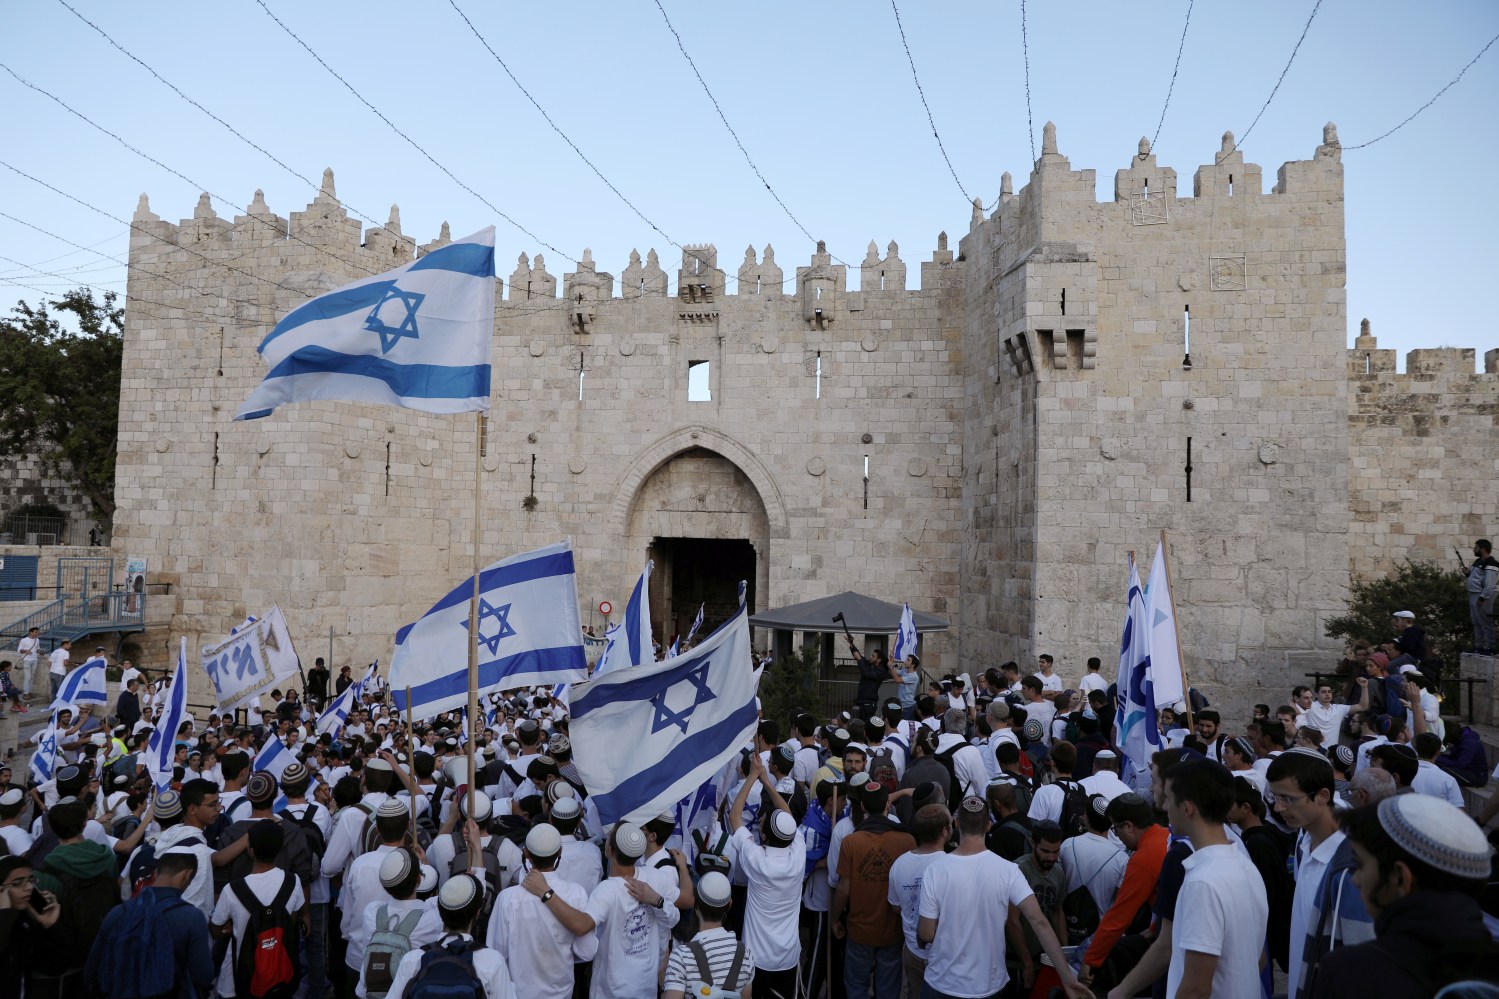 Israelis celebrate as they hold Israeli flags during a parade marking the annual Jerusalem Day, at Damascus Gate in Jerusalem's Old City, May 13, 2018. REUTERS/Ammar Awad - RC1A6A0D5F10